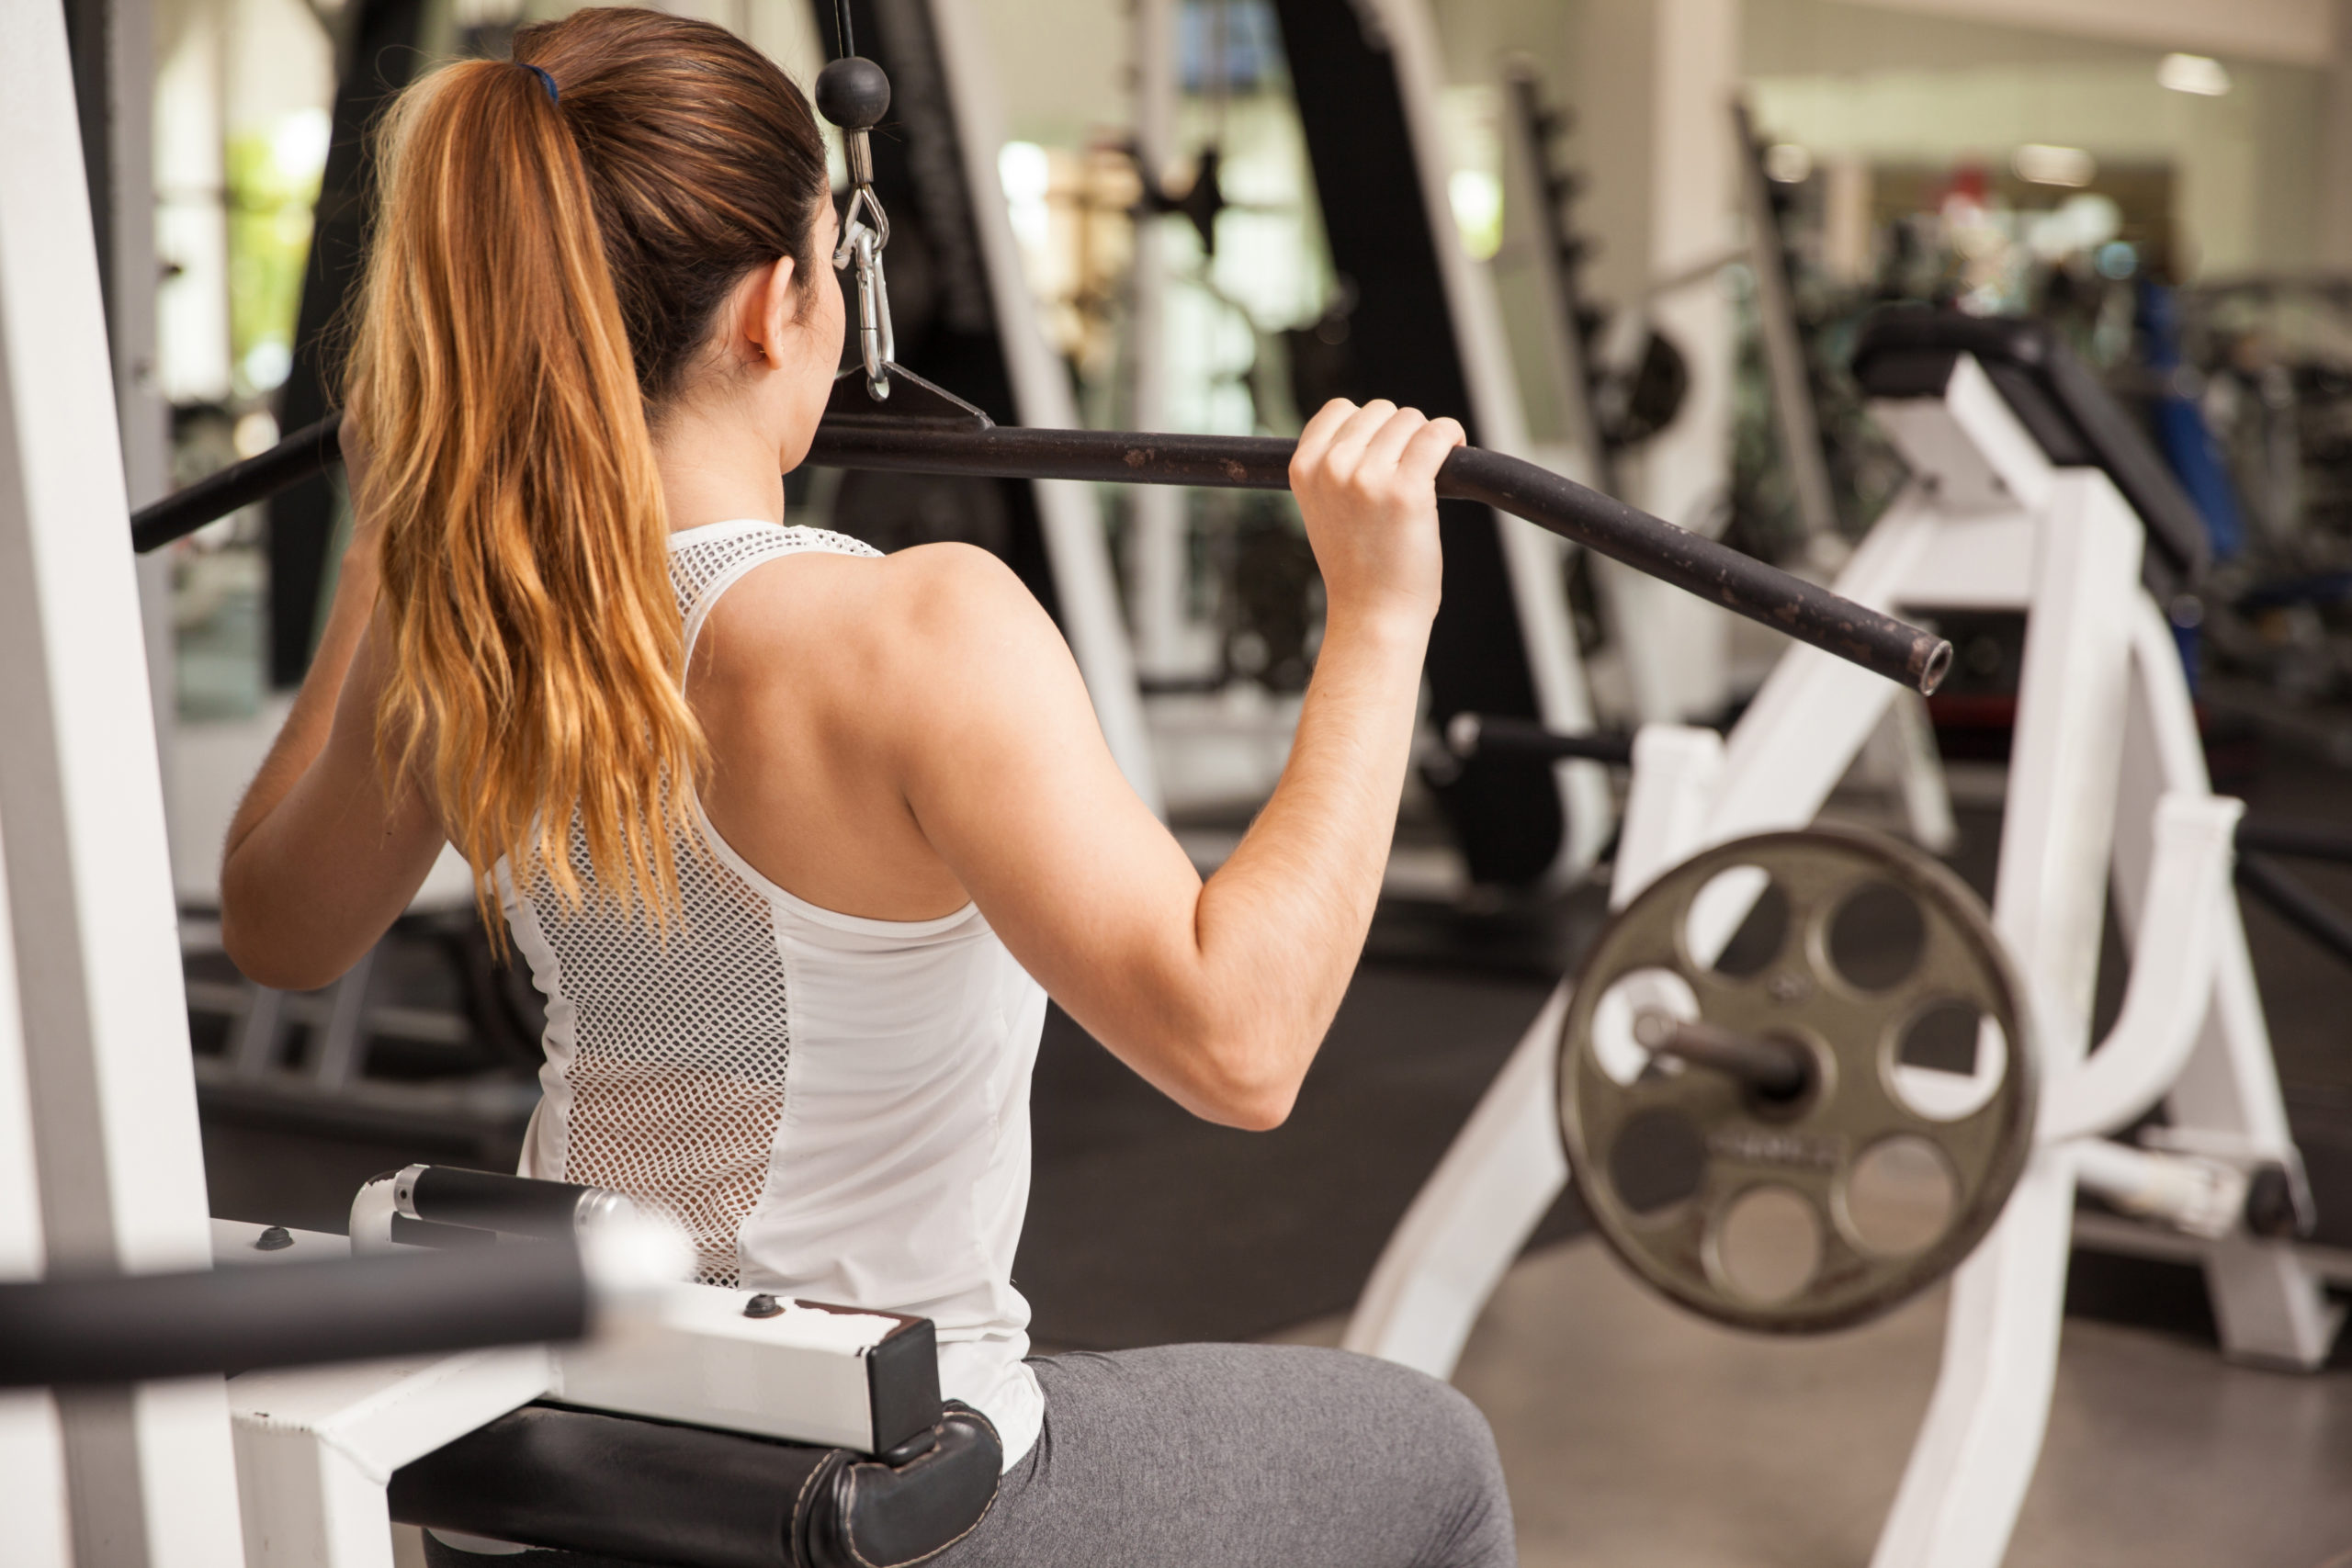 How to Use Weight Machines and Gym Equipment